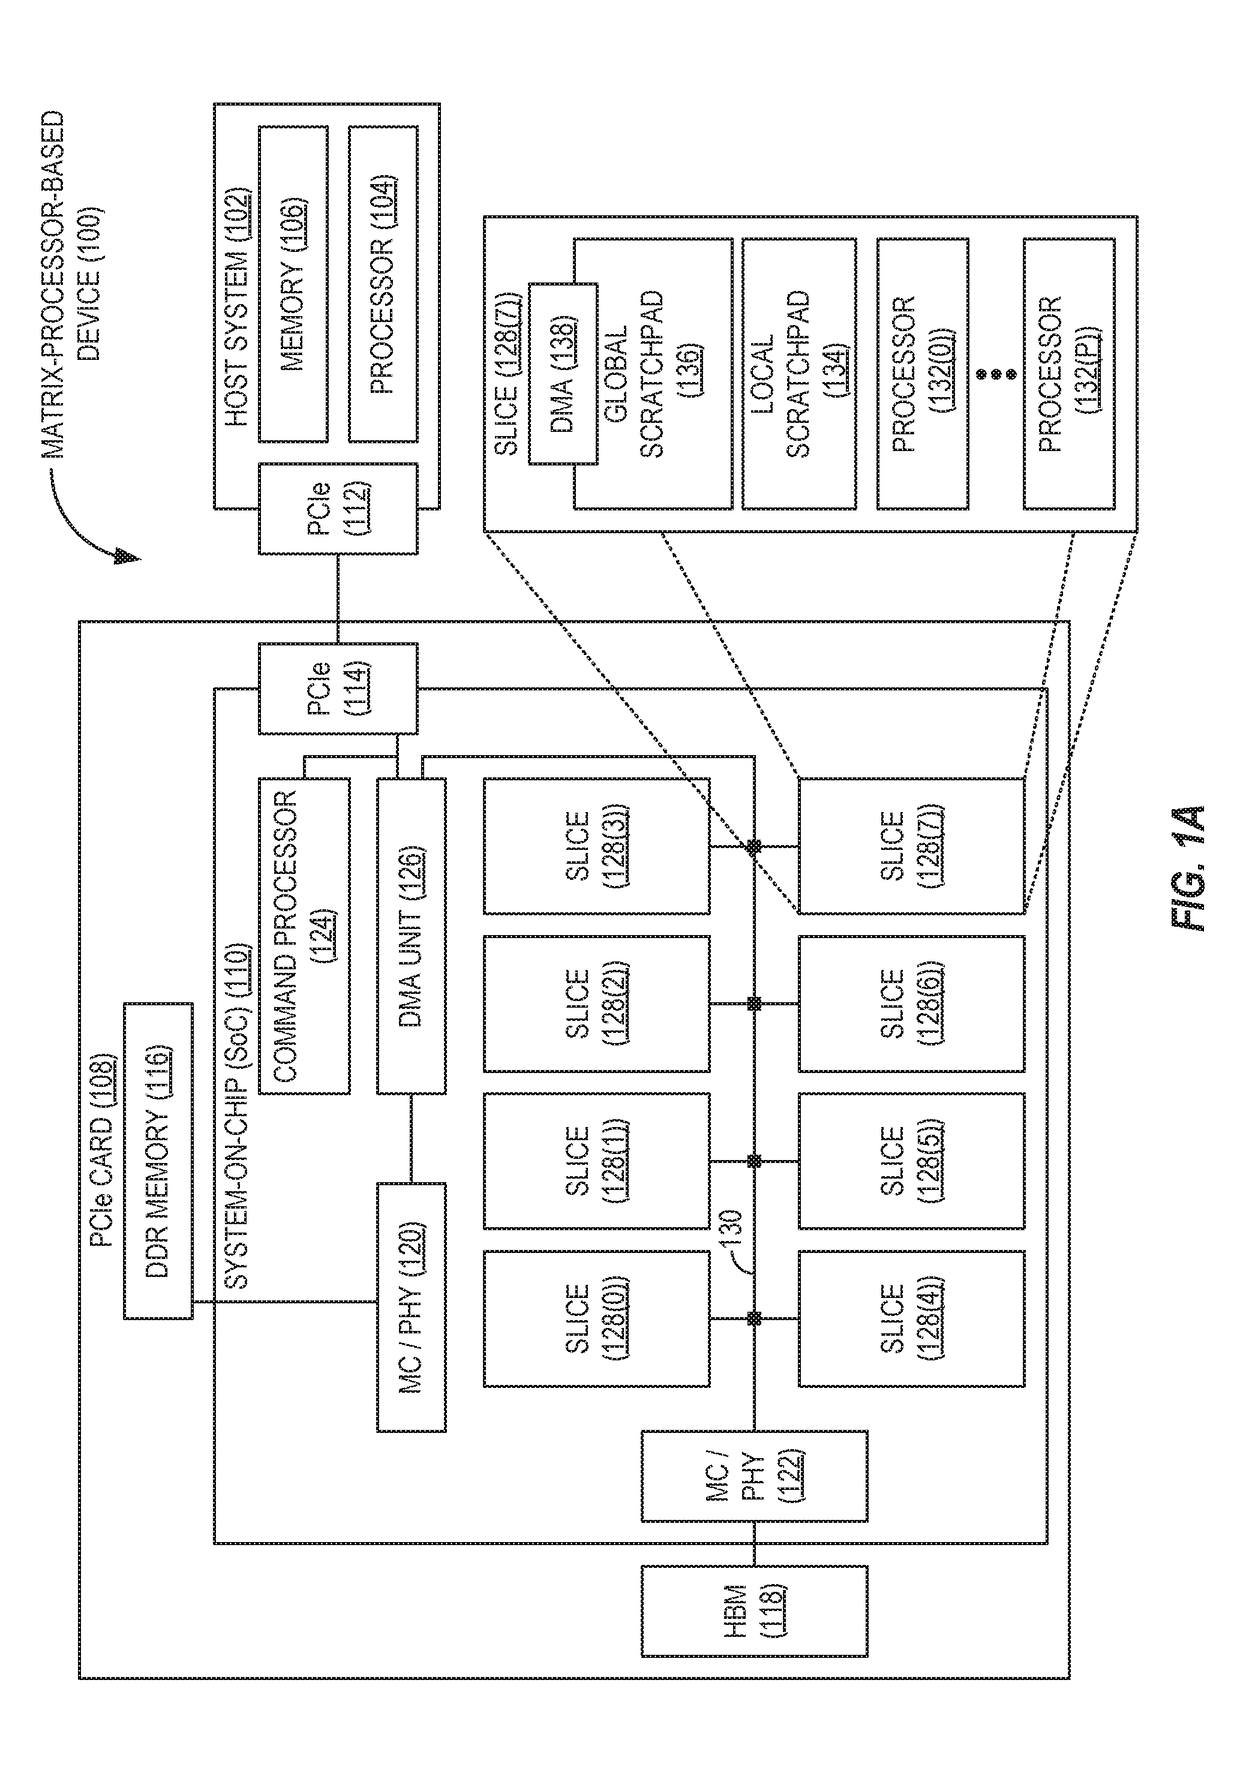 Providing efficient multiplication of sparse matrices in matrix-processor-based devices